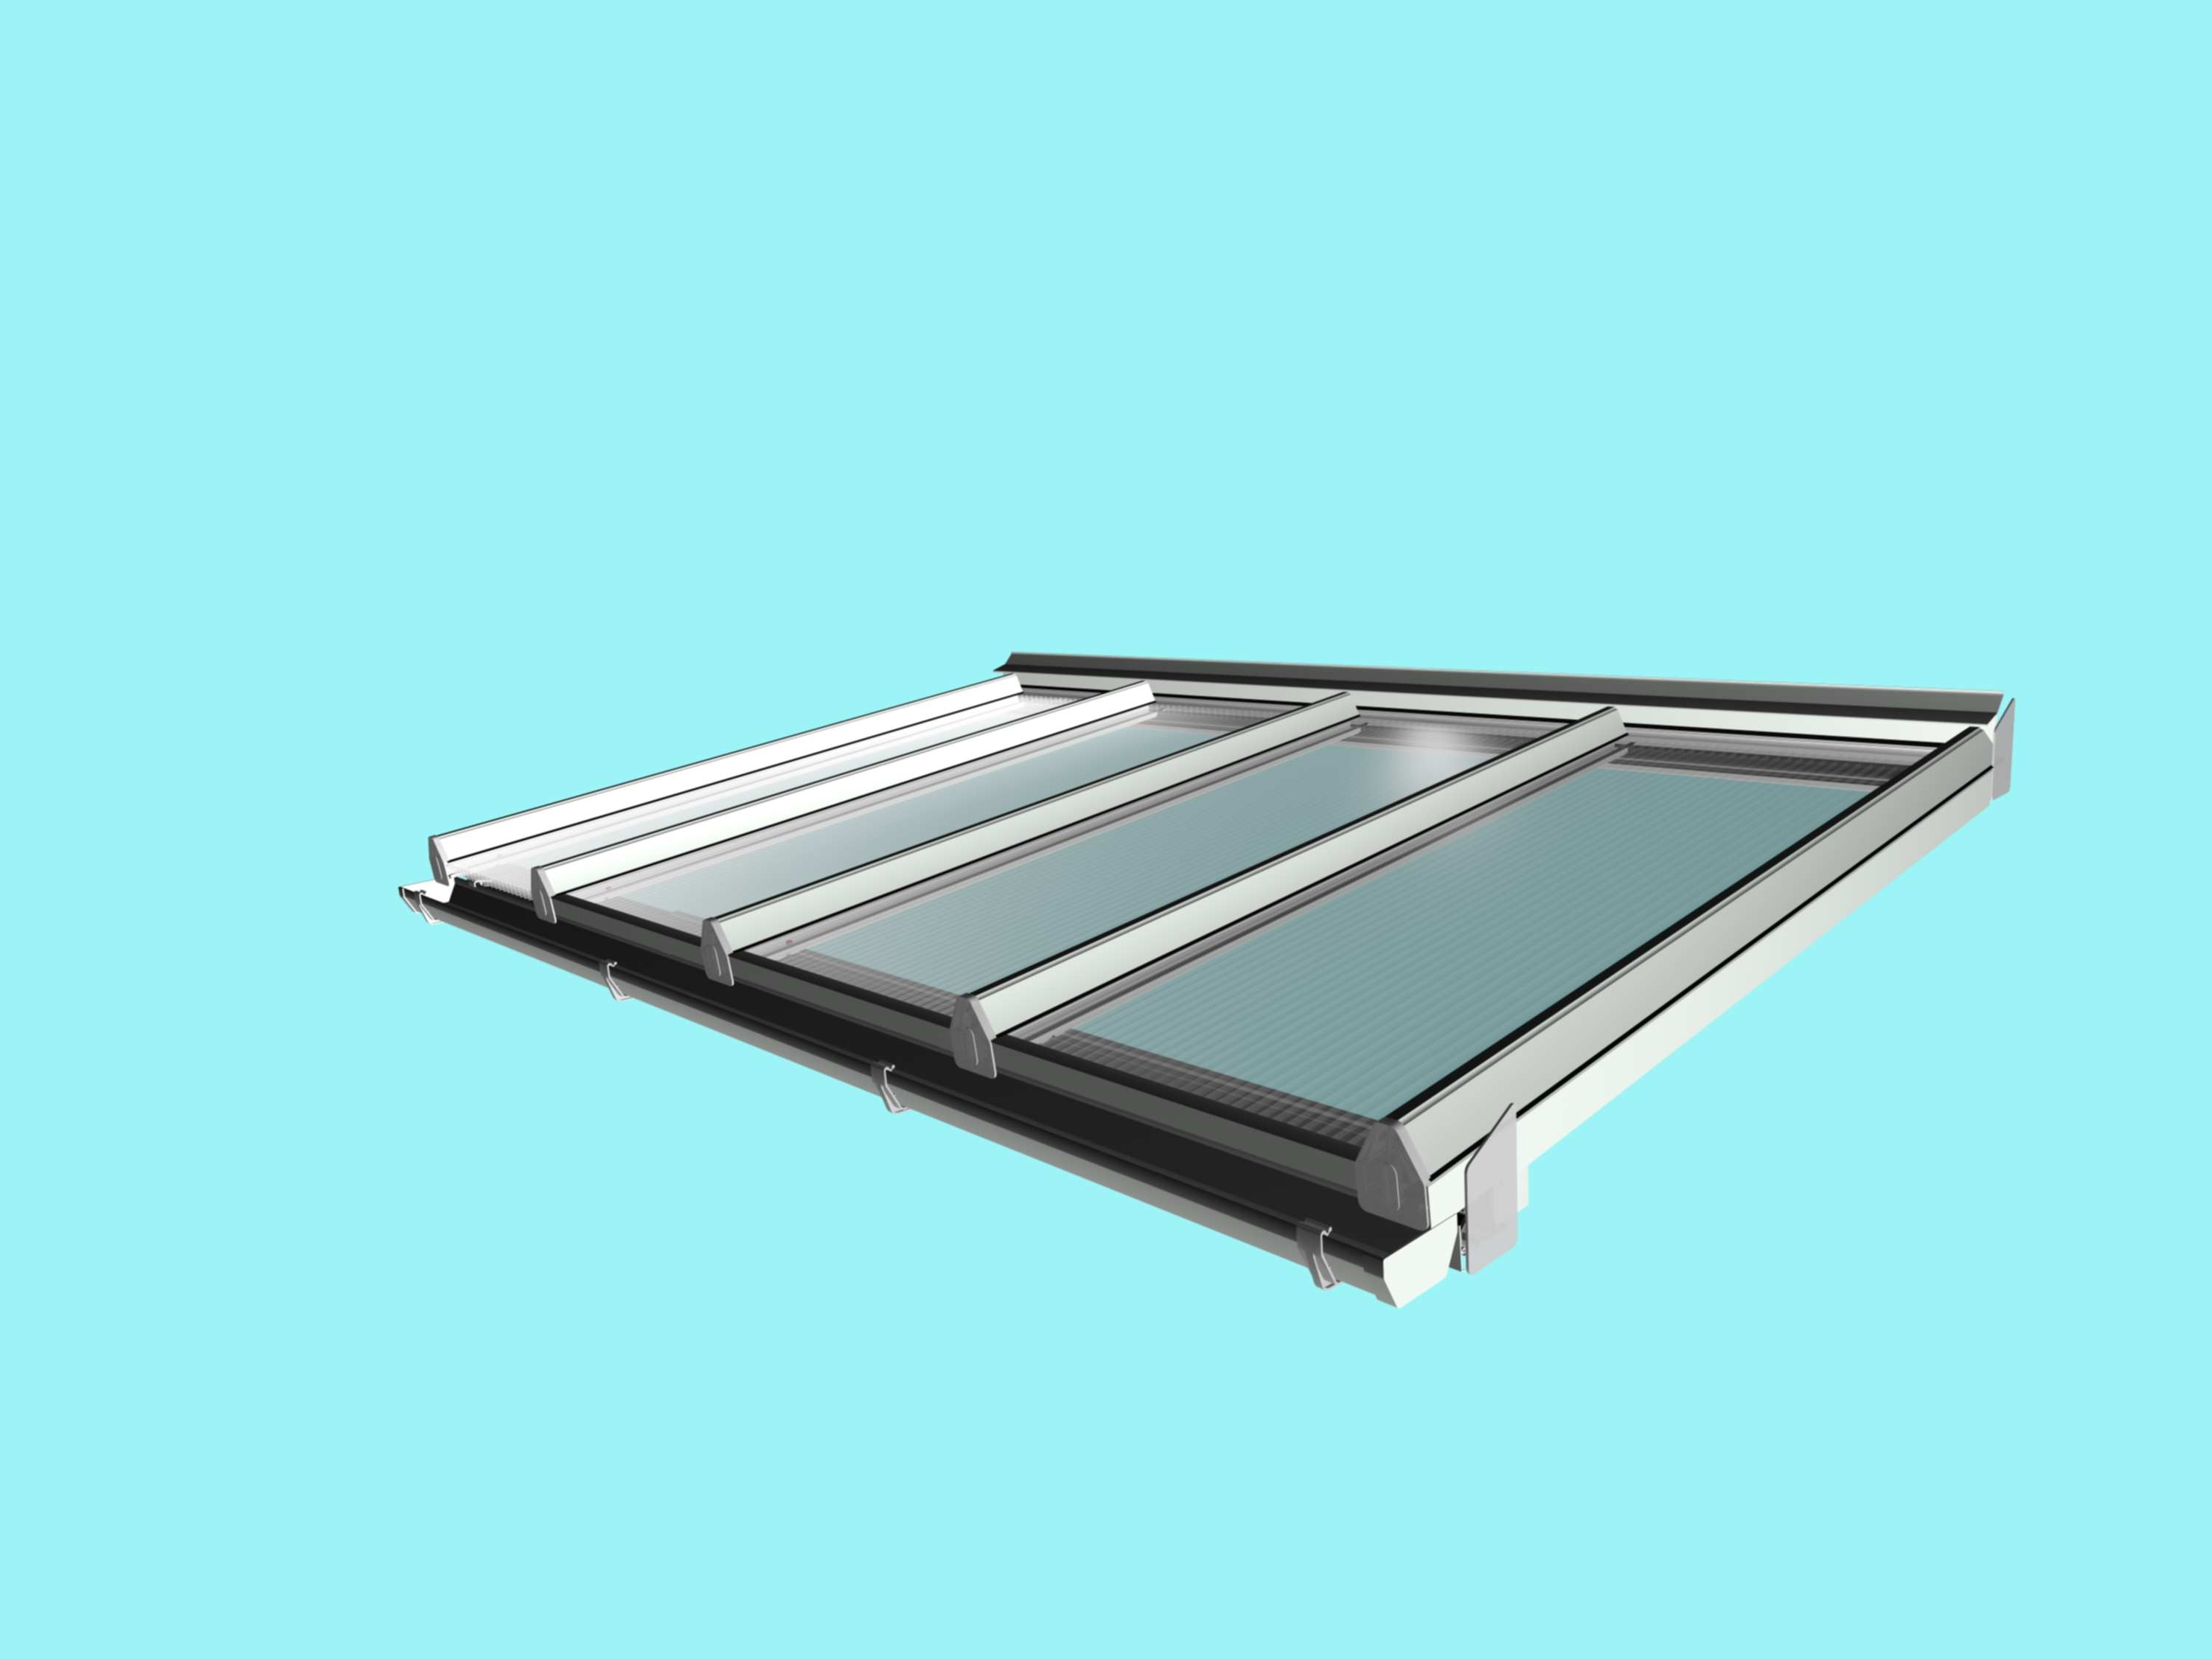 Self-Supporting DIY Conservatory Roof Kit for 16mm polycarbonate, 6.0m wide x 3.5m Projection from Omega Build